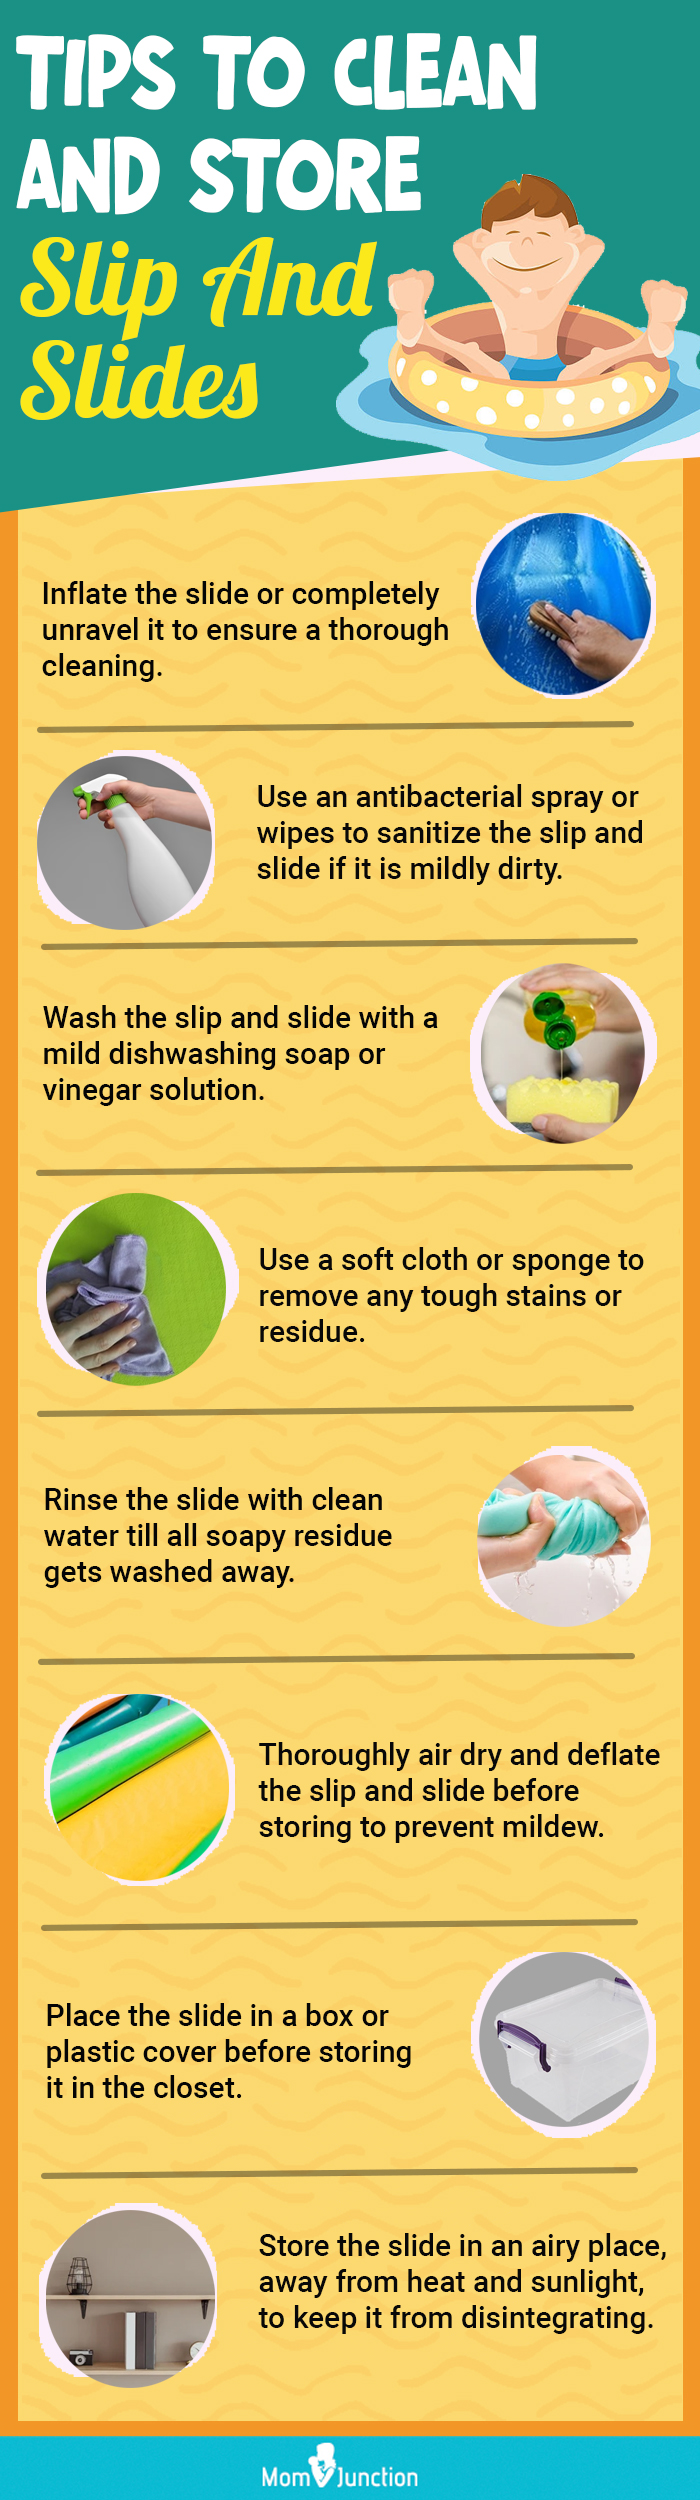 Tips To Clean And Store Slip And Slides (infographic)